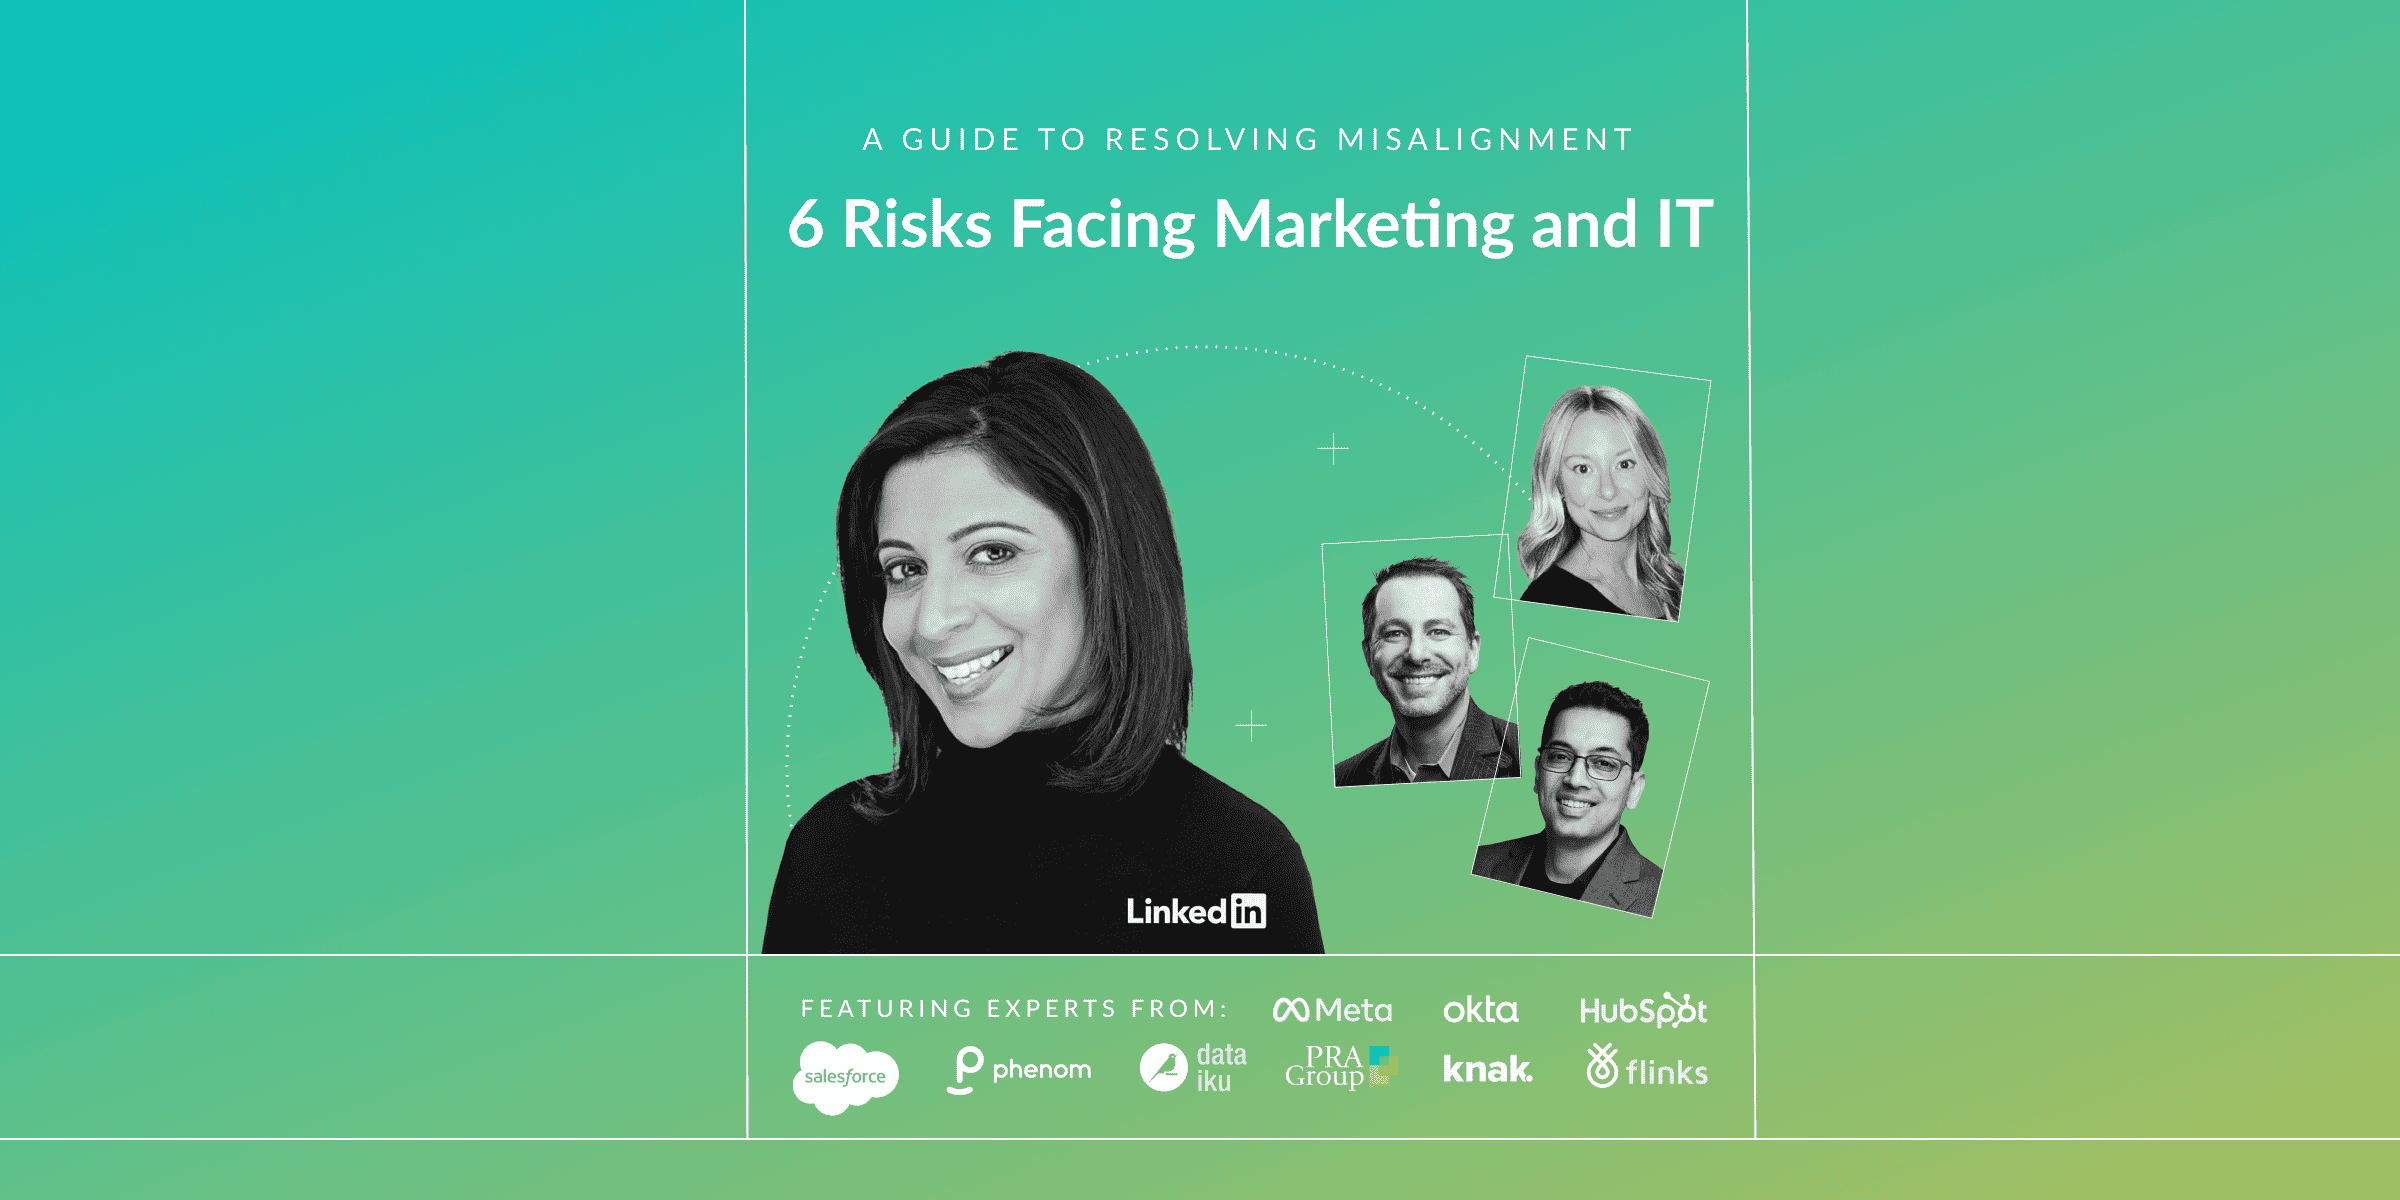 Unito eBook on 6 risks to marketing and IT, featuring expert insights from marketing and IT leaders at Meta, Okta, HubSpot, Salesforce, Dataiku, and PRA Group, with a foreword by Lekha Doshi, VP GTM Operations, LinkedIn.